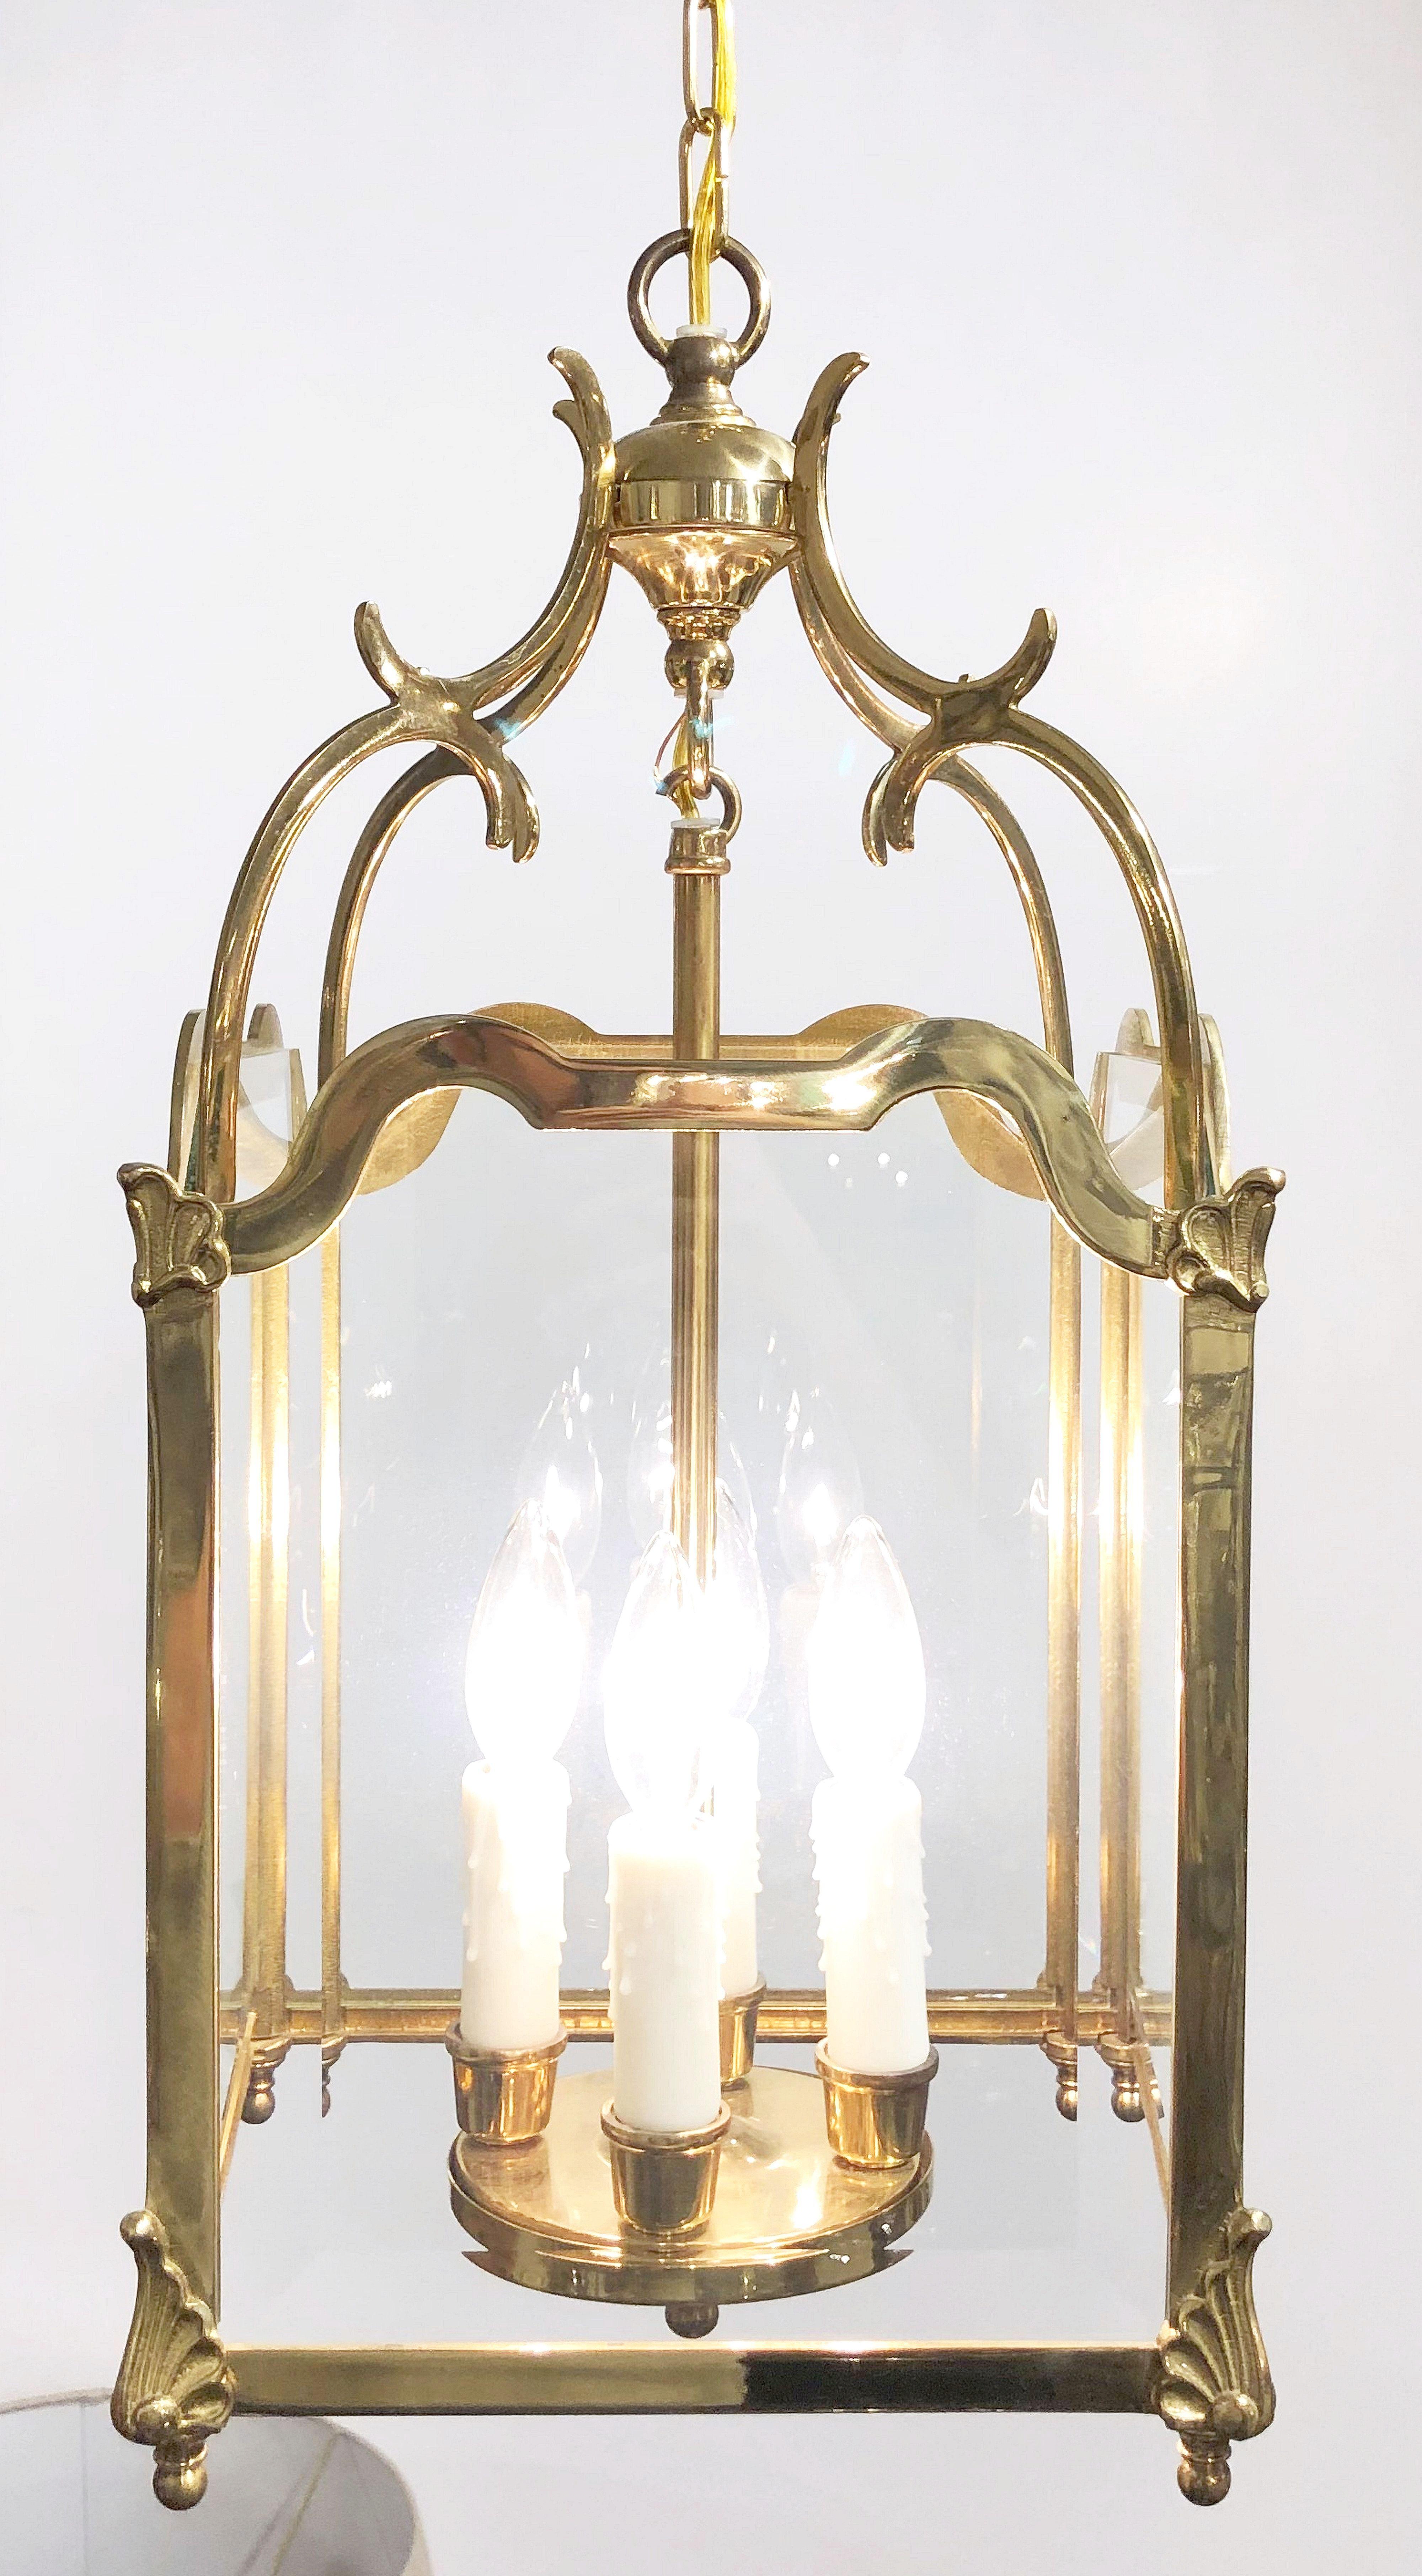 A large English four-light hanging fixture or hall or frame lantern of brass and beveled glass, featuring a four-sided body with scroll-work top and four candle lights with scroll-work top and shell motif to the corners. Decorative flourishes to top